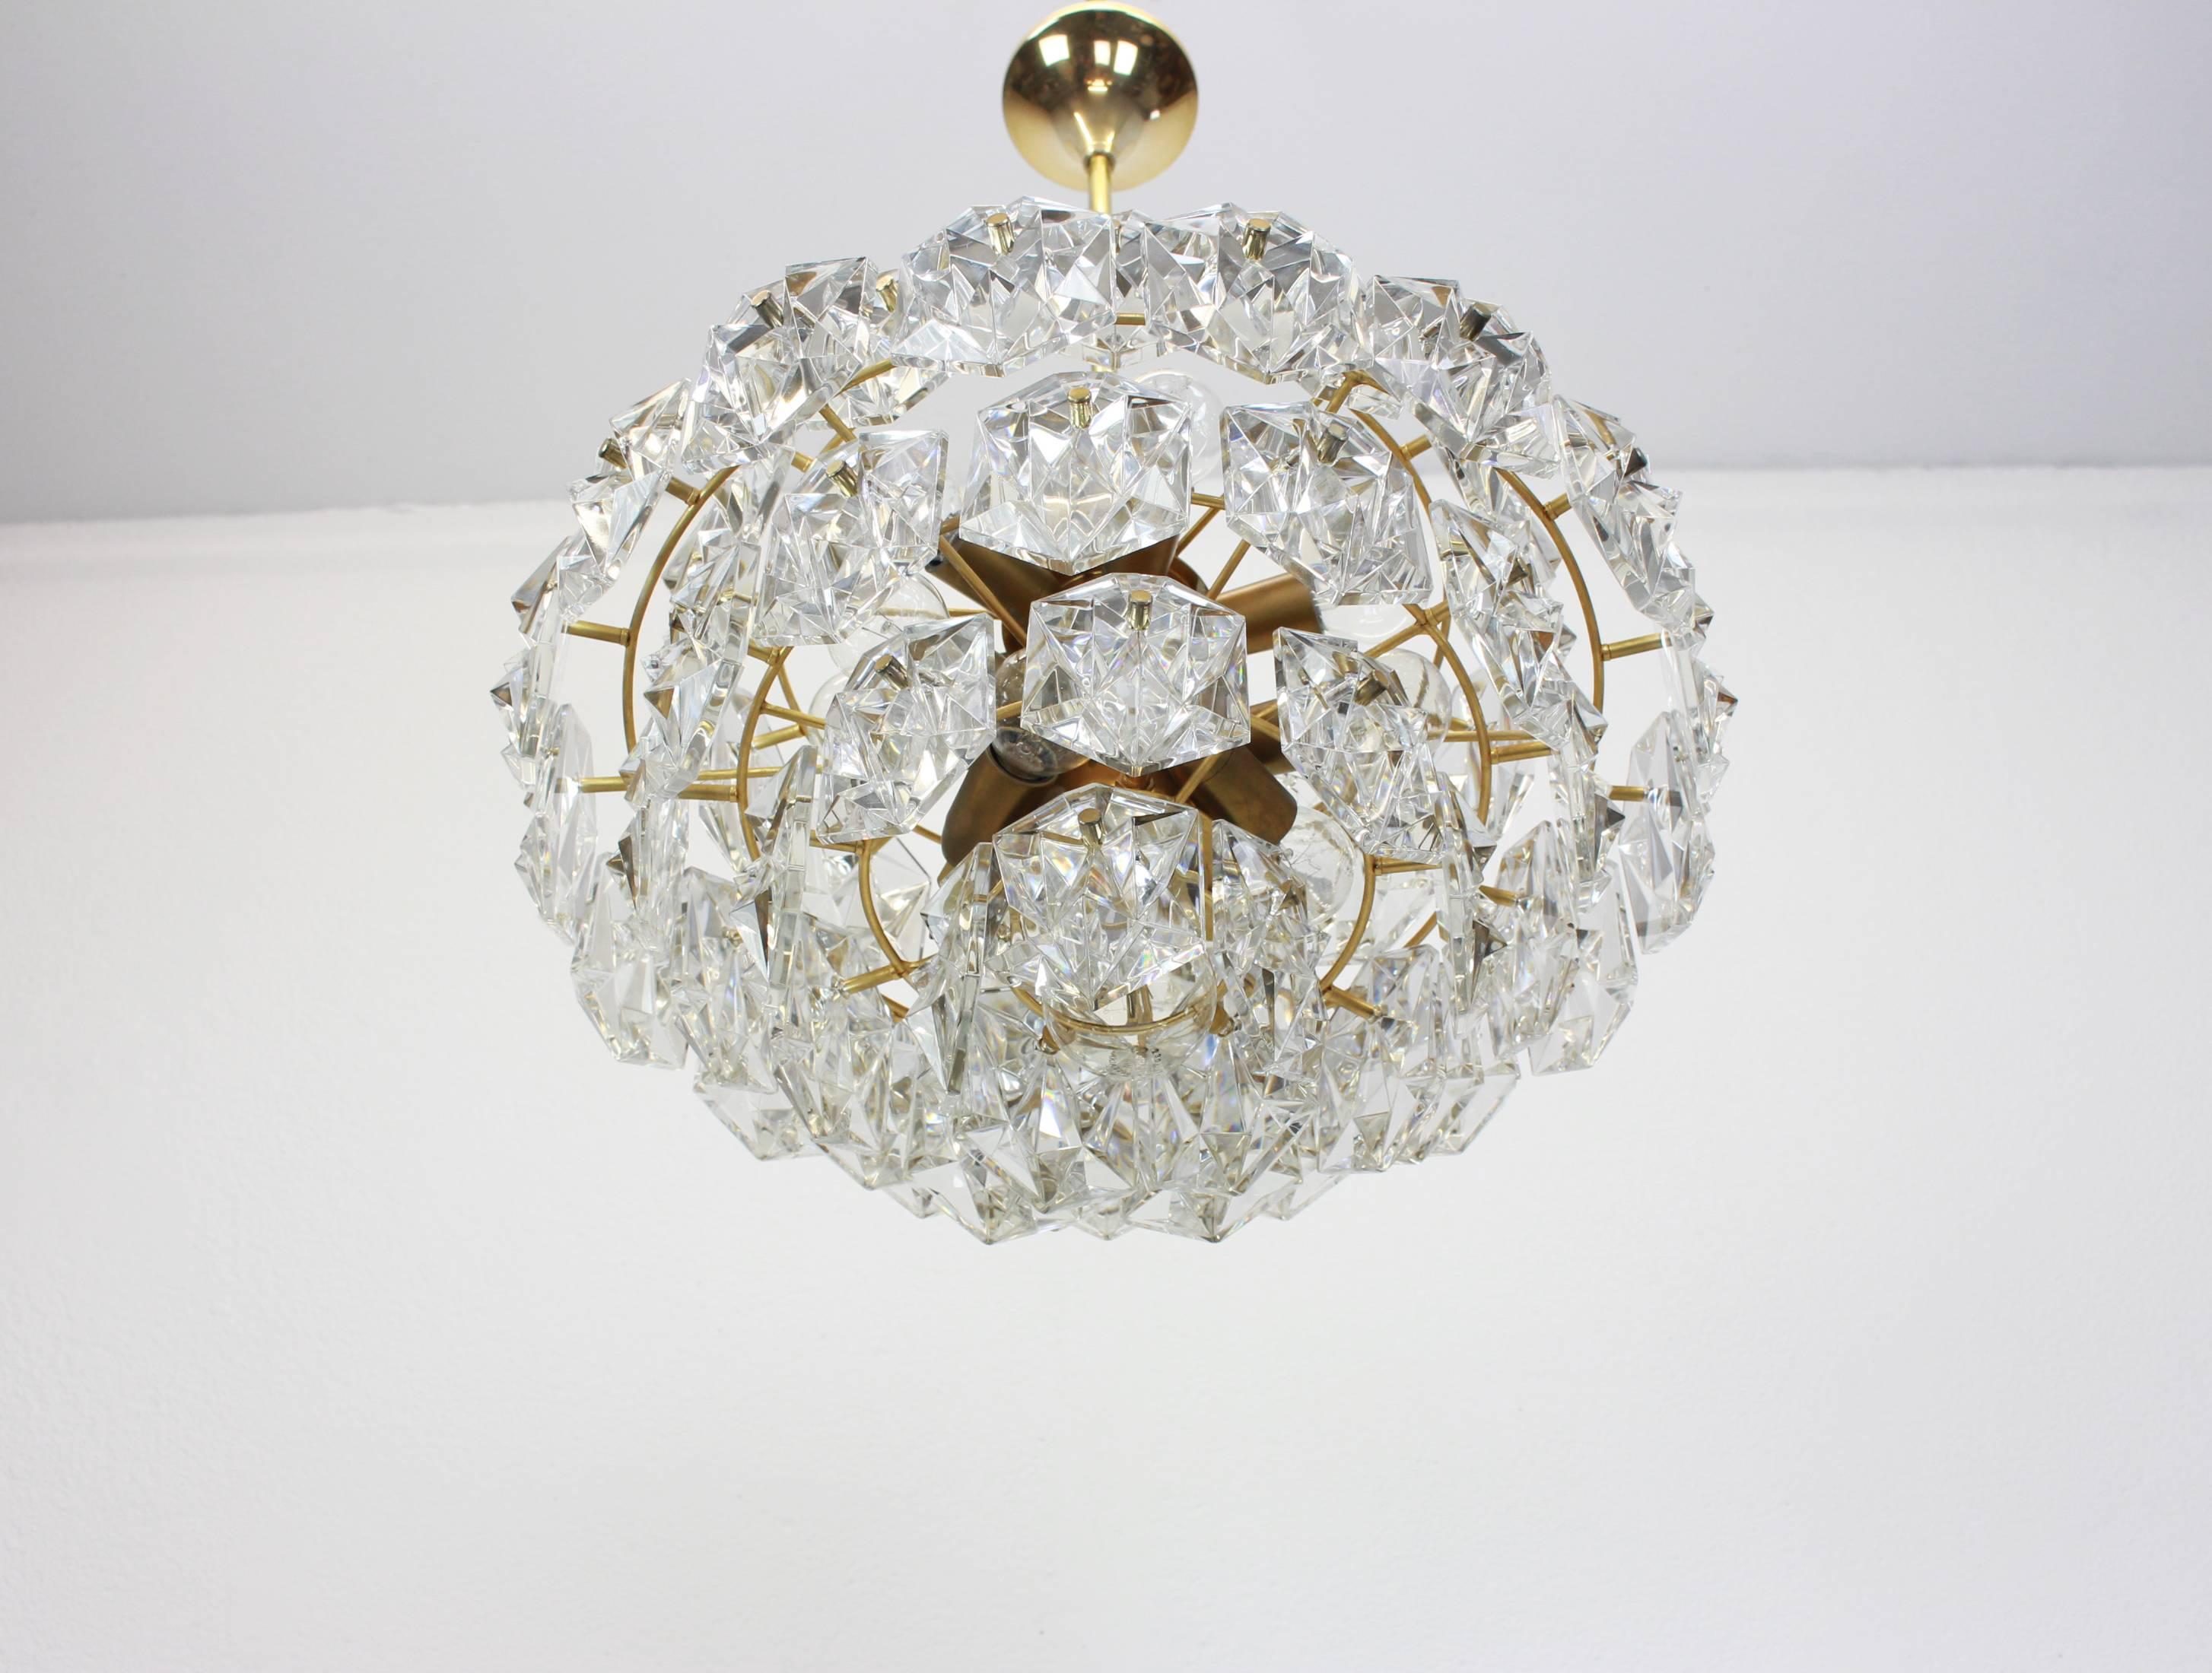 A stunning five-tier chandelier by Kinkeldey, Germany, manufactured in circa 1960-1969. A handmade and high-quality piece. The ceiling fixture and the frame are made of brass and have five rings with lots of faceted crystal glass elements.

High